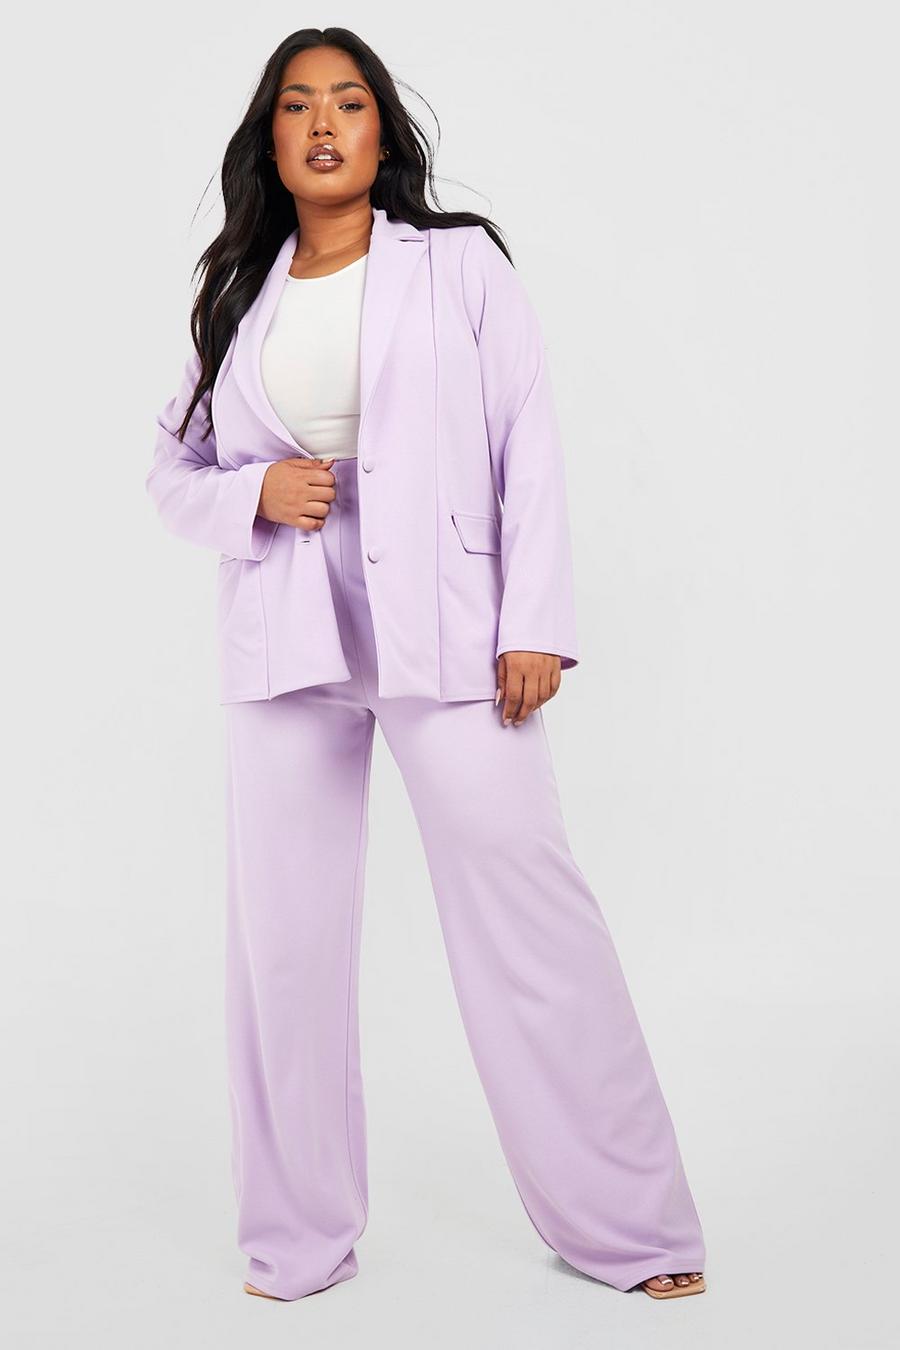 Lilac Plus Size Women's Suits Casual Coat Pants For Wedding Ladies Work  Outfits